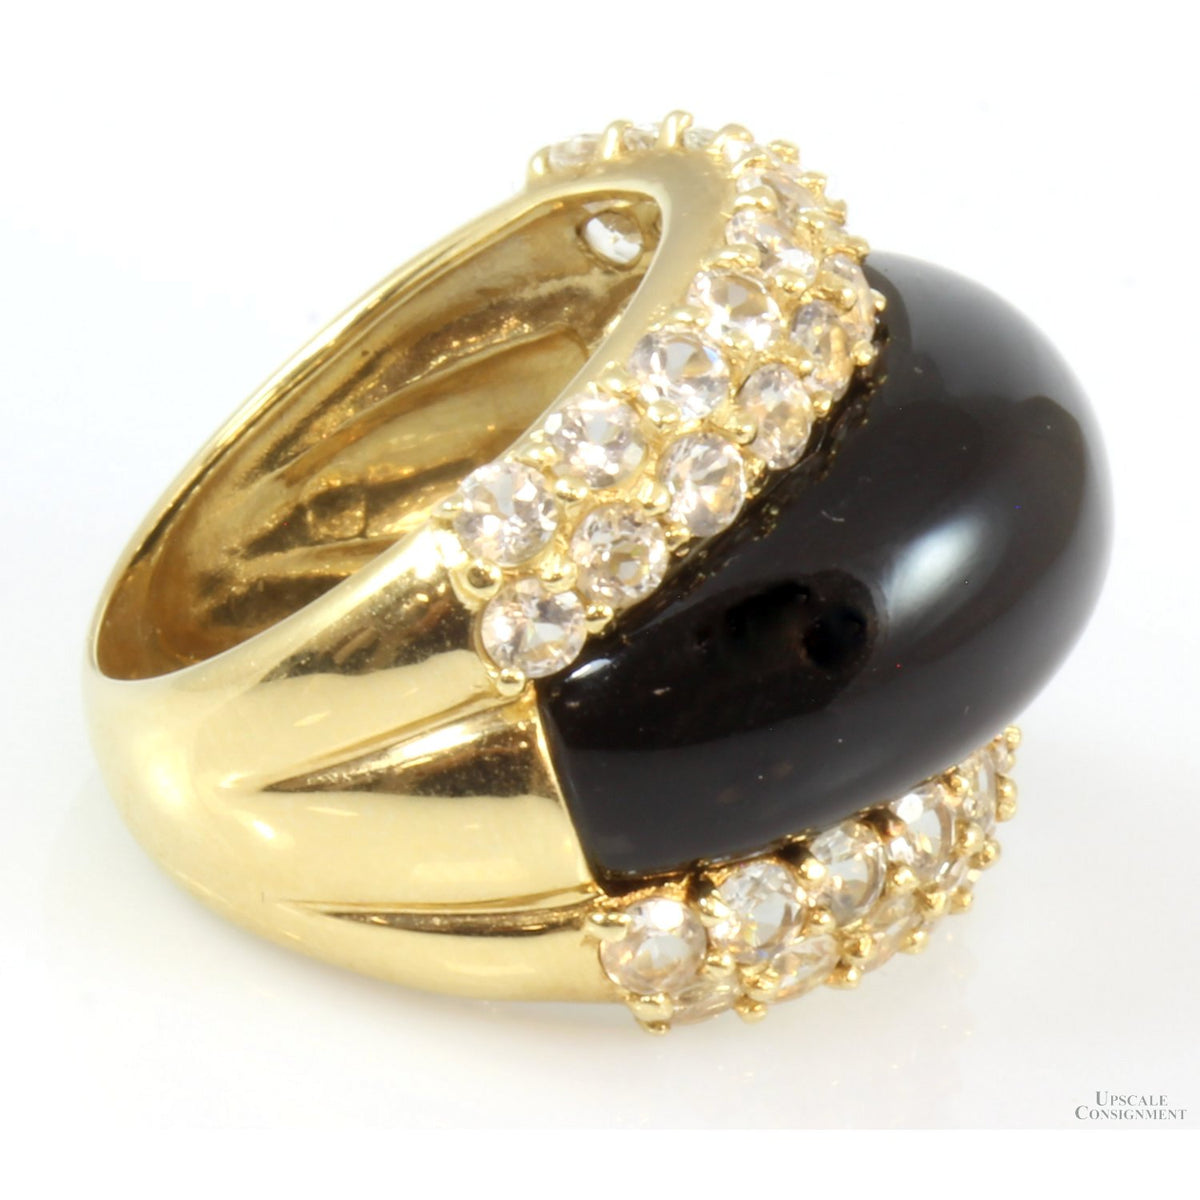 14K Gold Black Onyx & Colorless Topaz Dome Ring